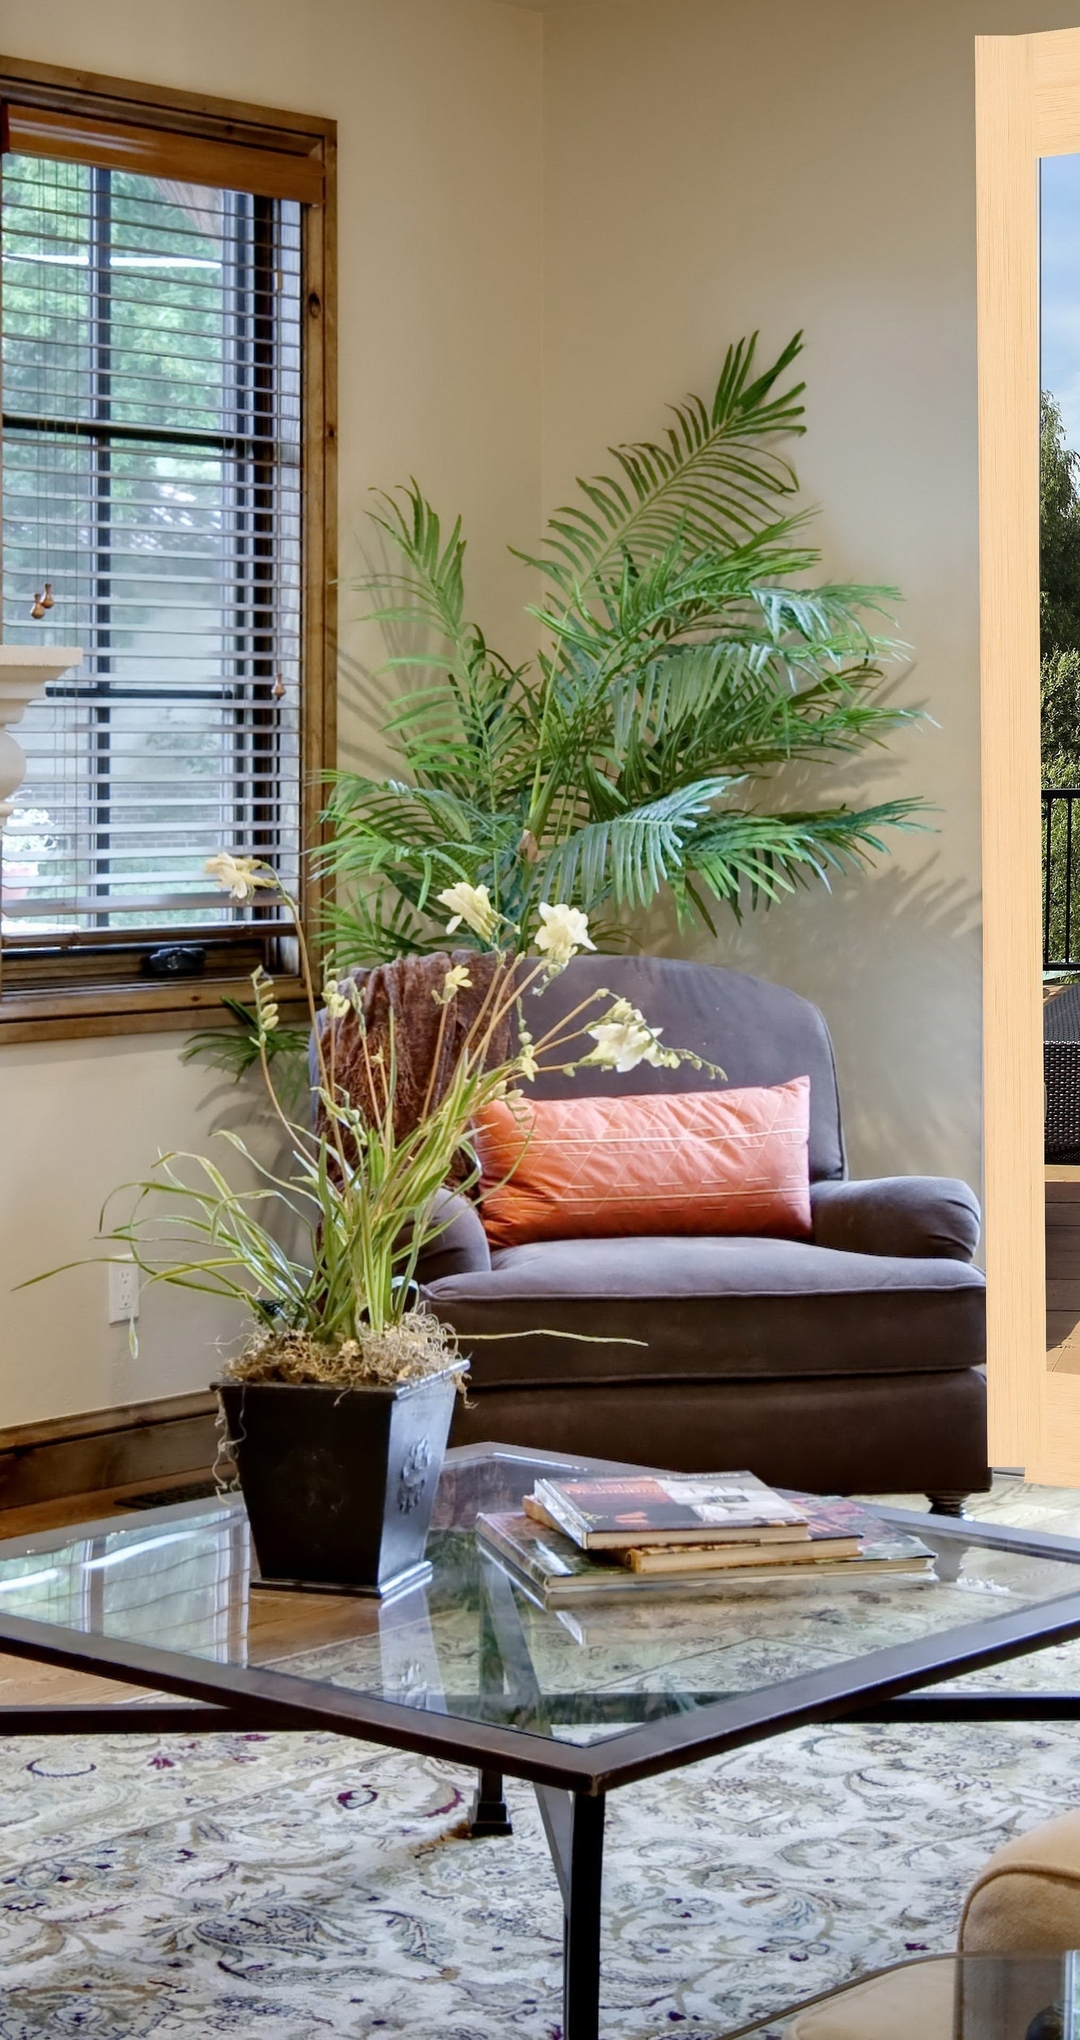 Image: Fireplace, table, sofa, window, blinds, plants, painting, terrace